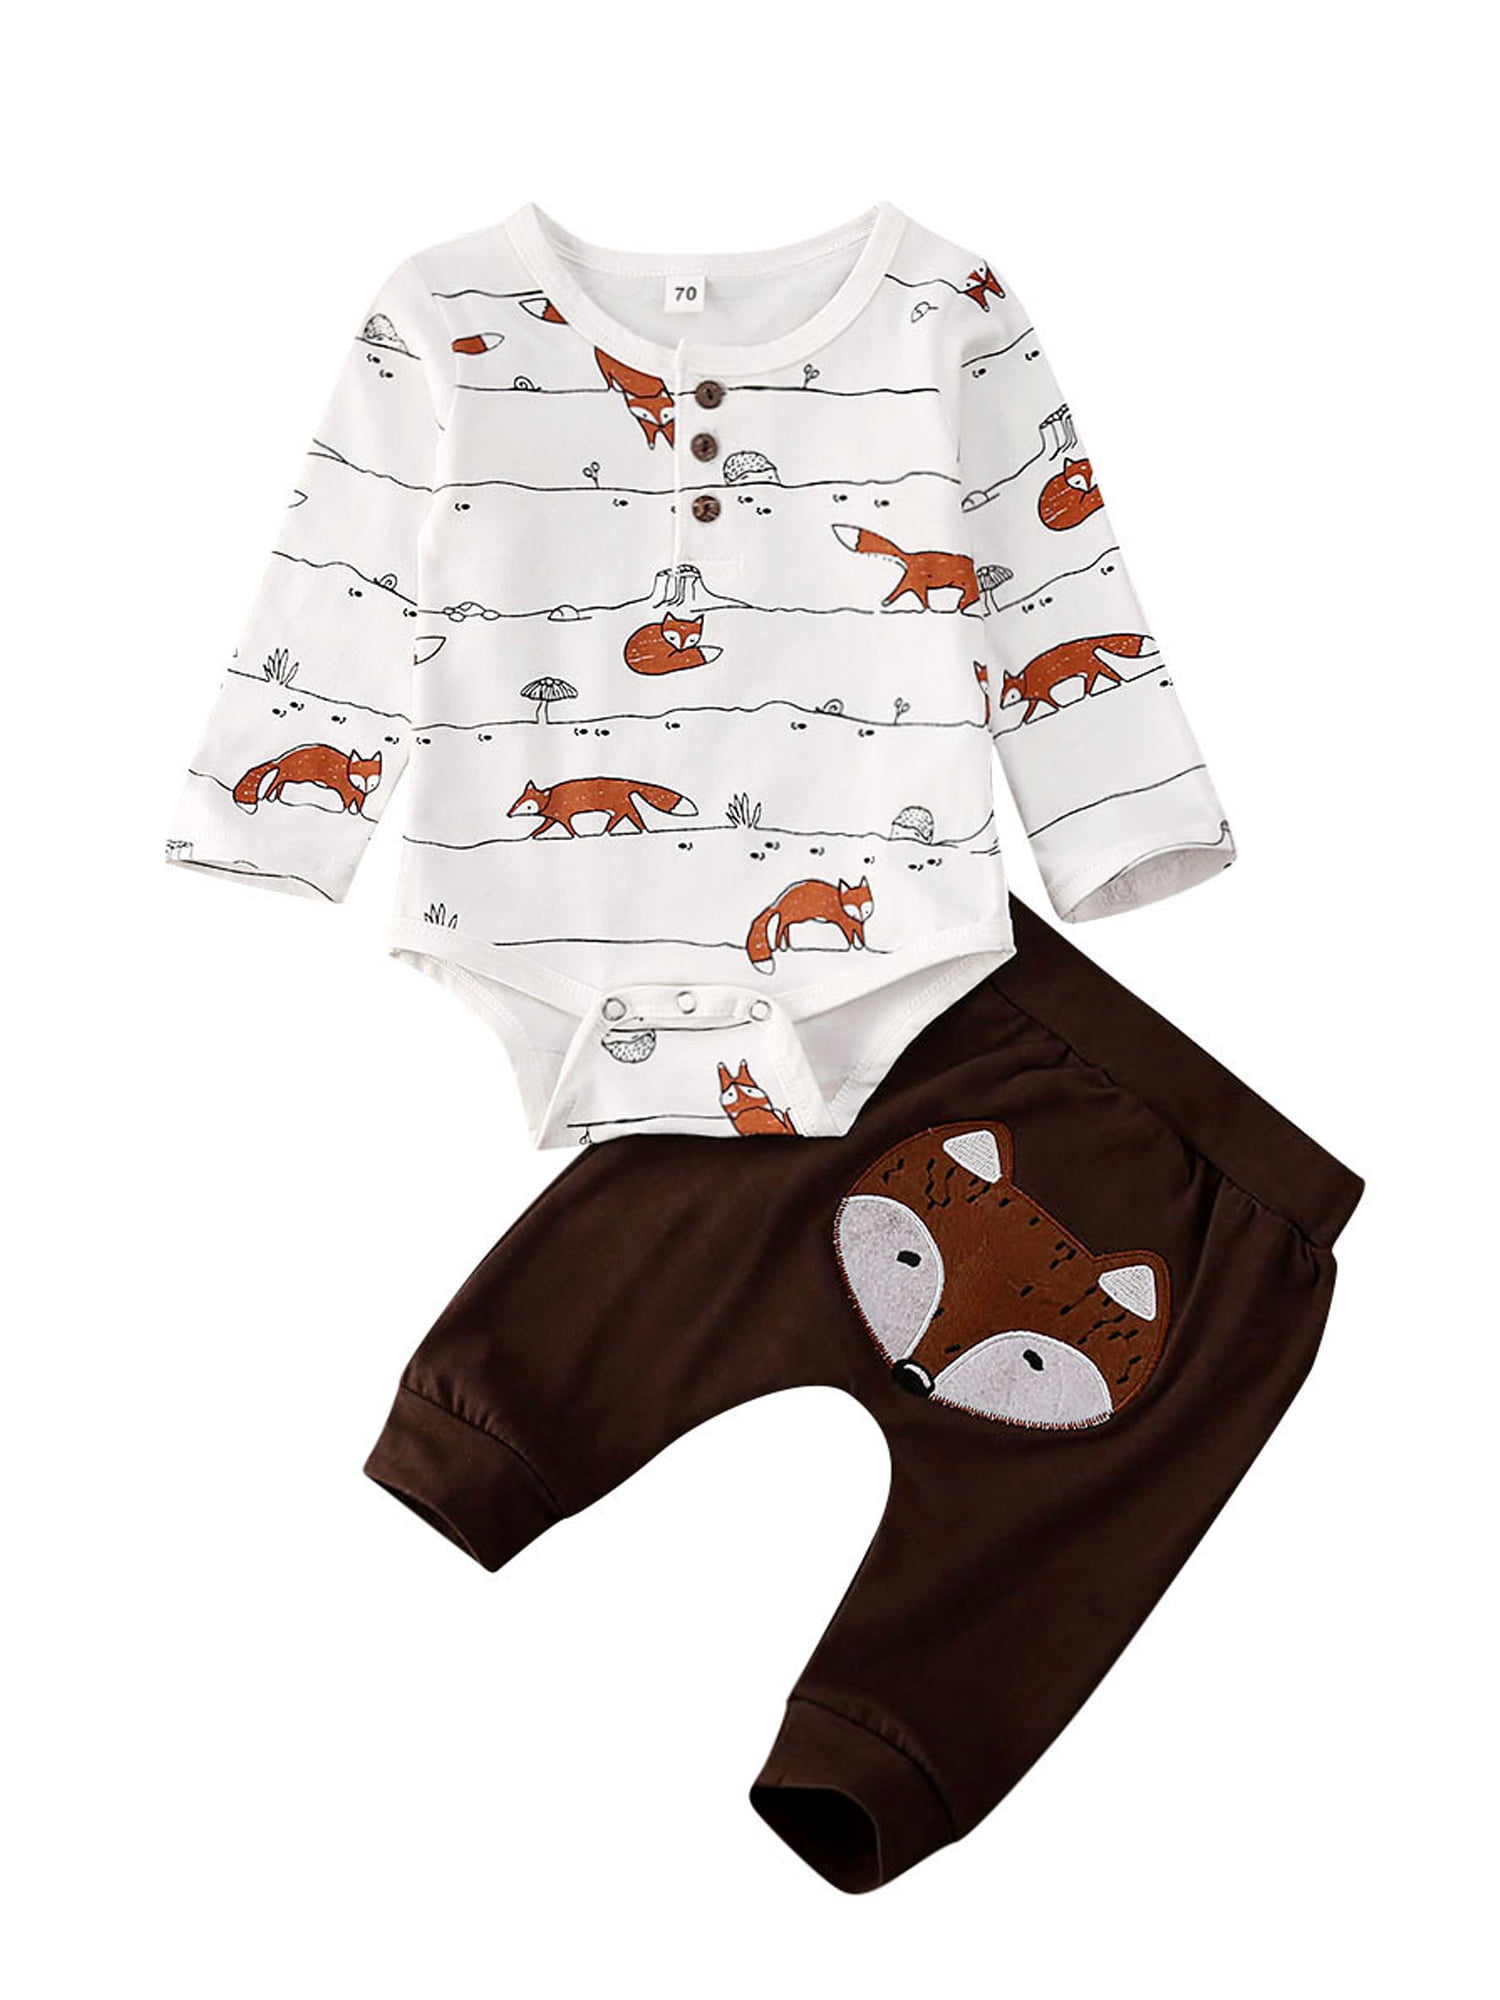 Clode for 0-2 Years Old Boys Girls Newborn Baby Boys Girls Cartoon Wolf Print Long Sleeve Romper Outfits Clothes